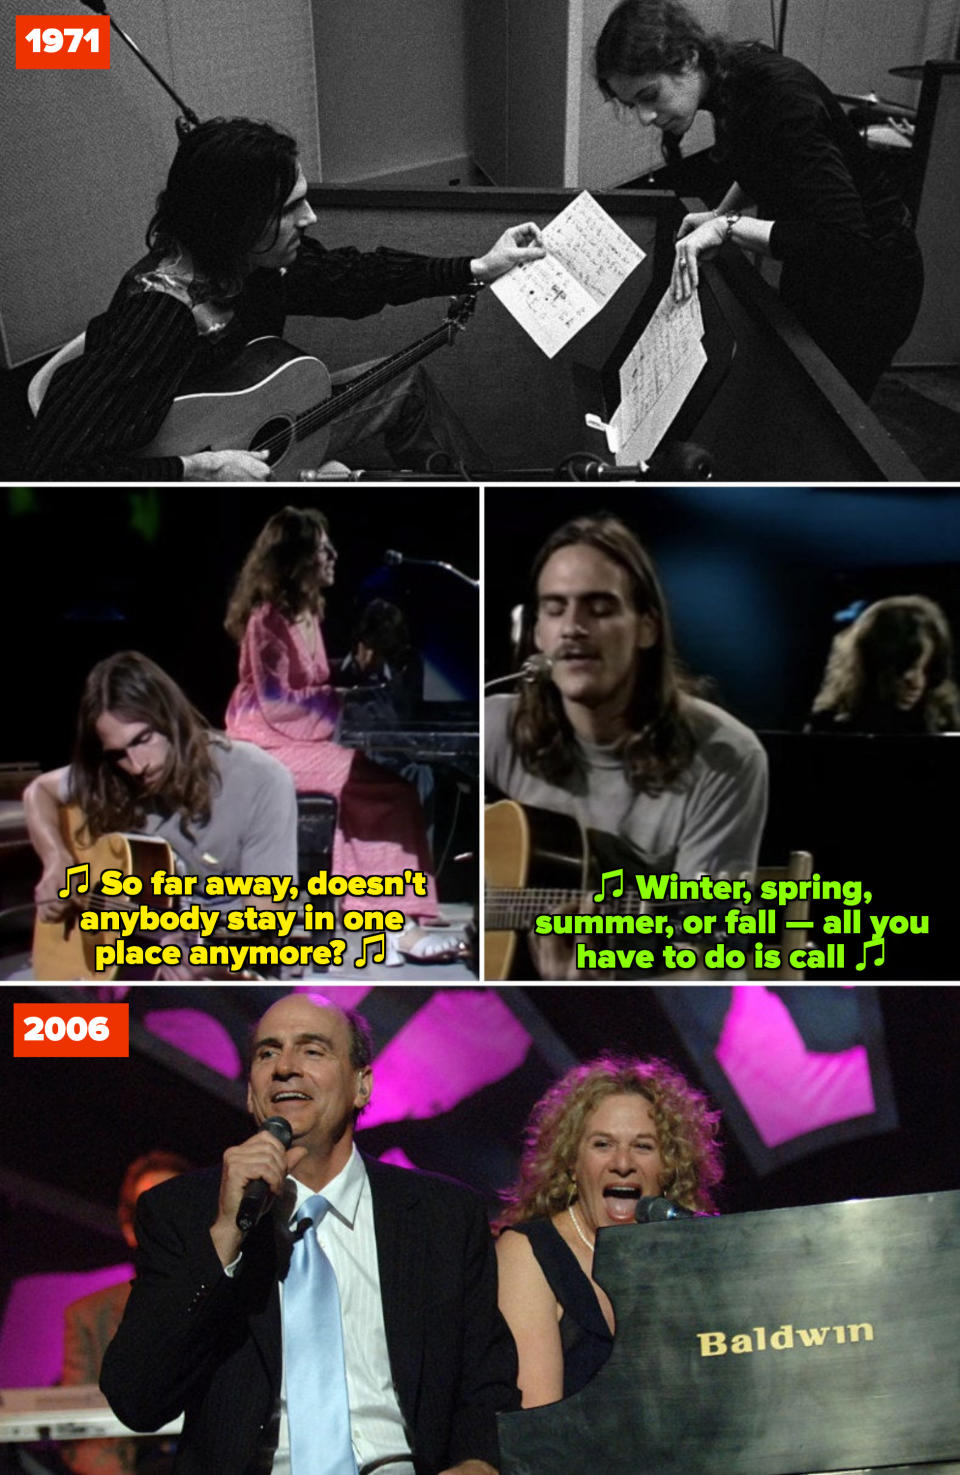 King and Taylor in a recording studio in 1971; King and Taylor performing "So Far Away" and "You've Got a Friend" on BBC in Concert in 1971; King and Taylor performing at Taylor's MusiCares Person of the Year ceremony in 2006